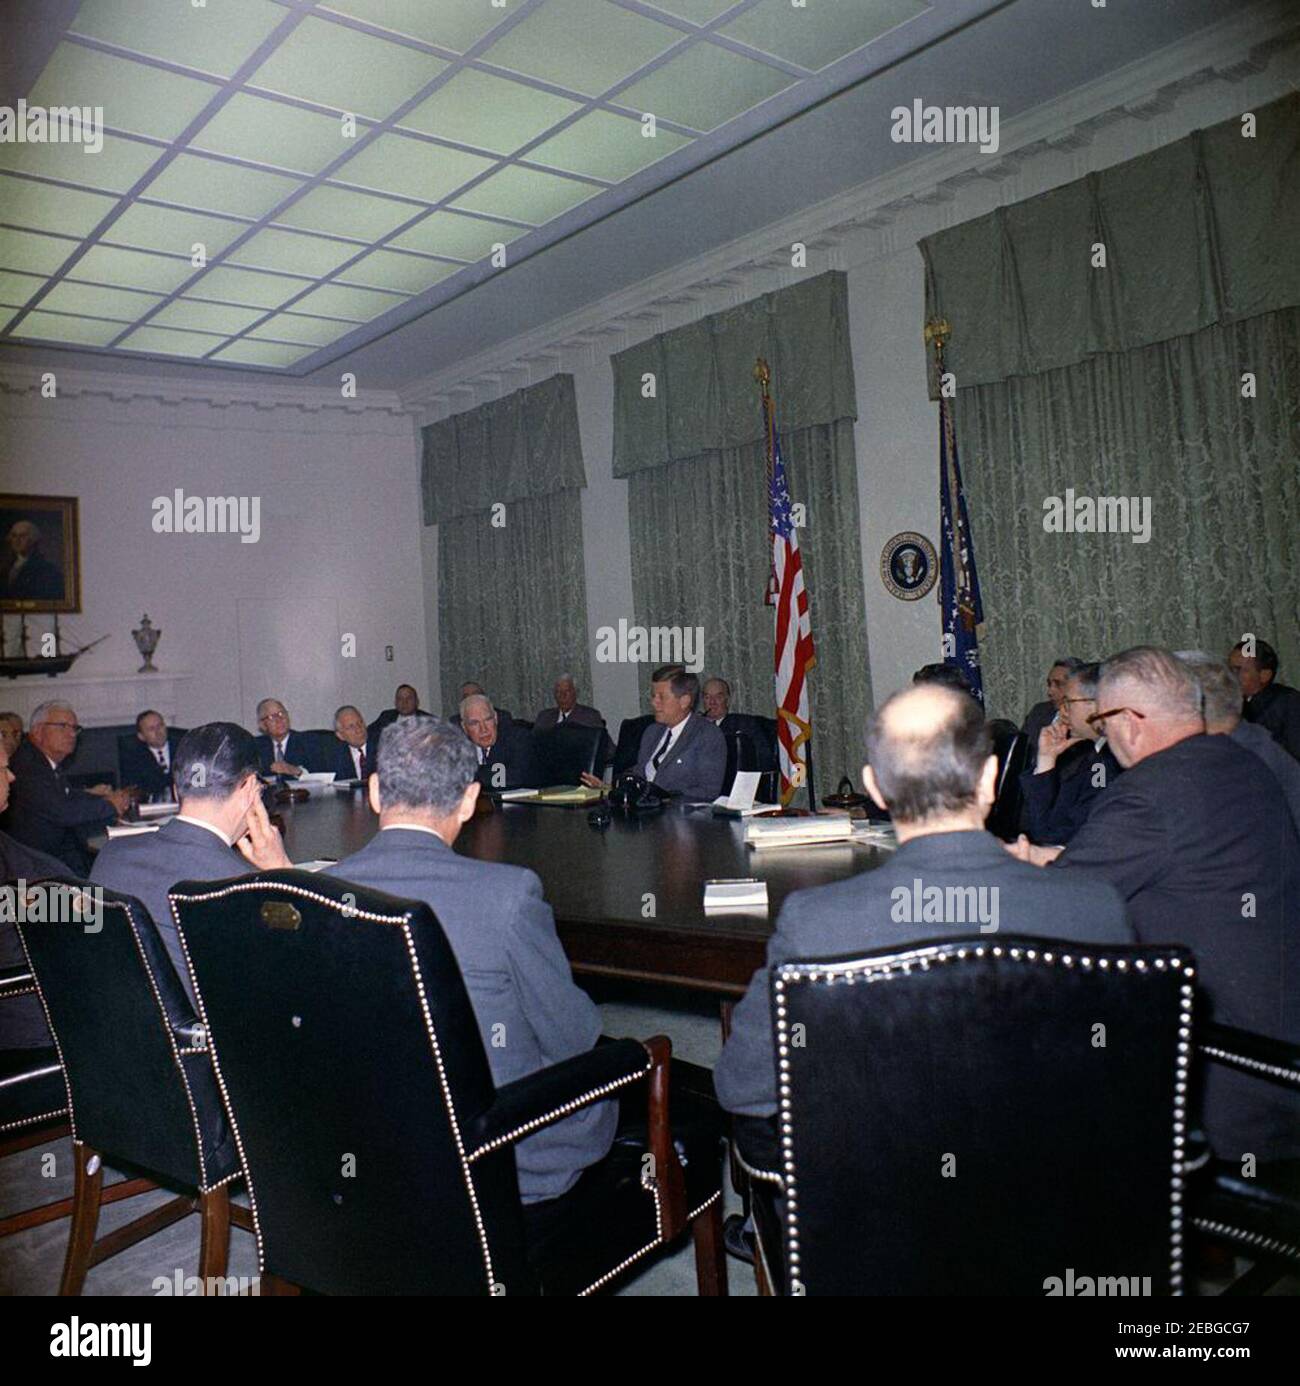 Visit of members of the National Export Expansion Council in the Cabinet Room, 12:10PM. President John F. Kennedy (center, seated at right side of table) talks with members of the National Export Expansion Council in the Cabinet Room of the White House, Washington, D.C. Secretary of Commerce Luther H. Hodges sits left of President Kennedy; Roger P. Sonnabend, Executive Vice President of Hotel Corporation of America (three seats left of Secretary Hodges), sits at the head of the table; all others are unidentified. [Please see the Presidentu2019s schedule for a complete list of attendees.] Stock Photo